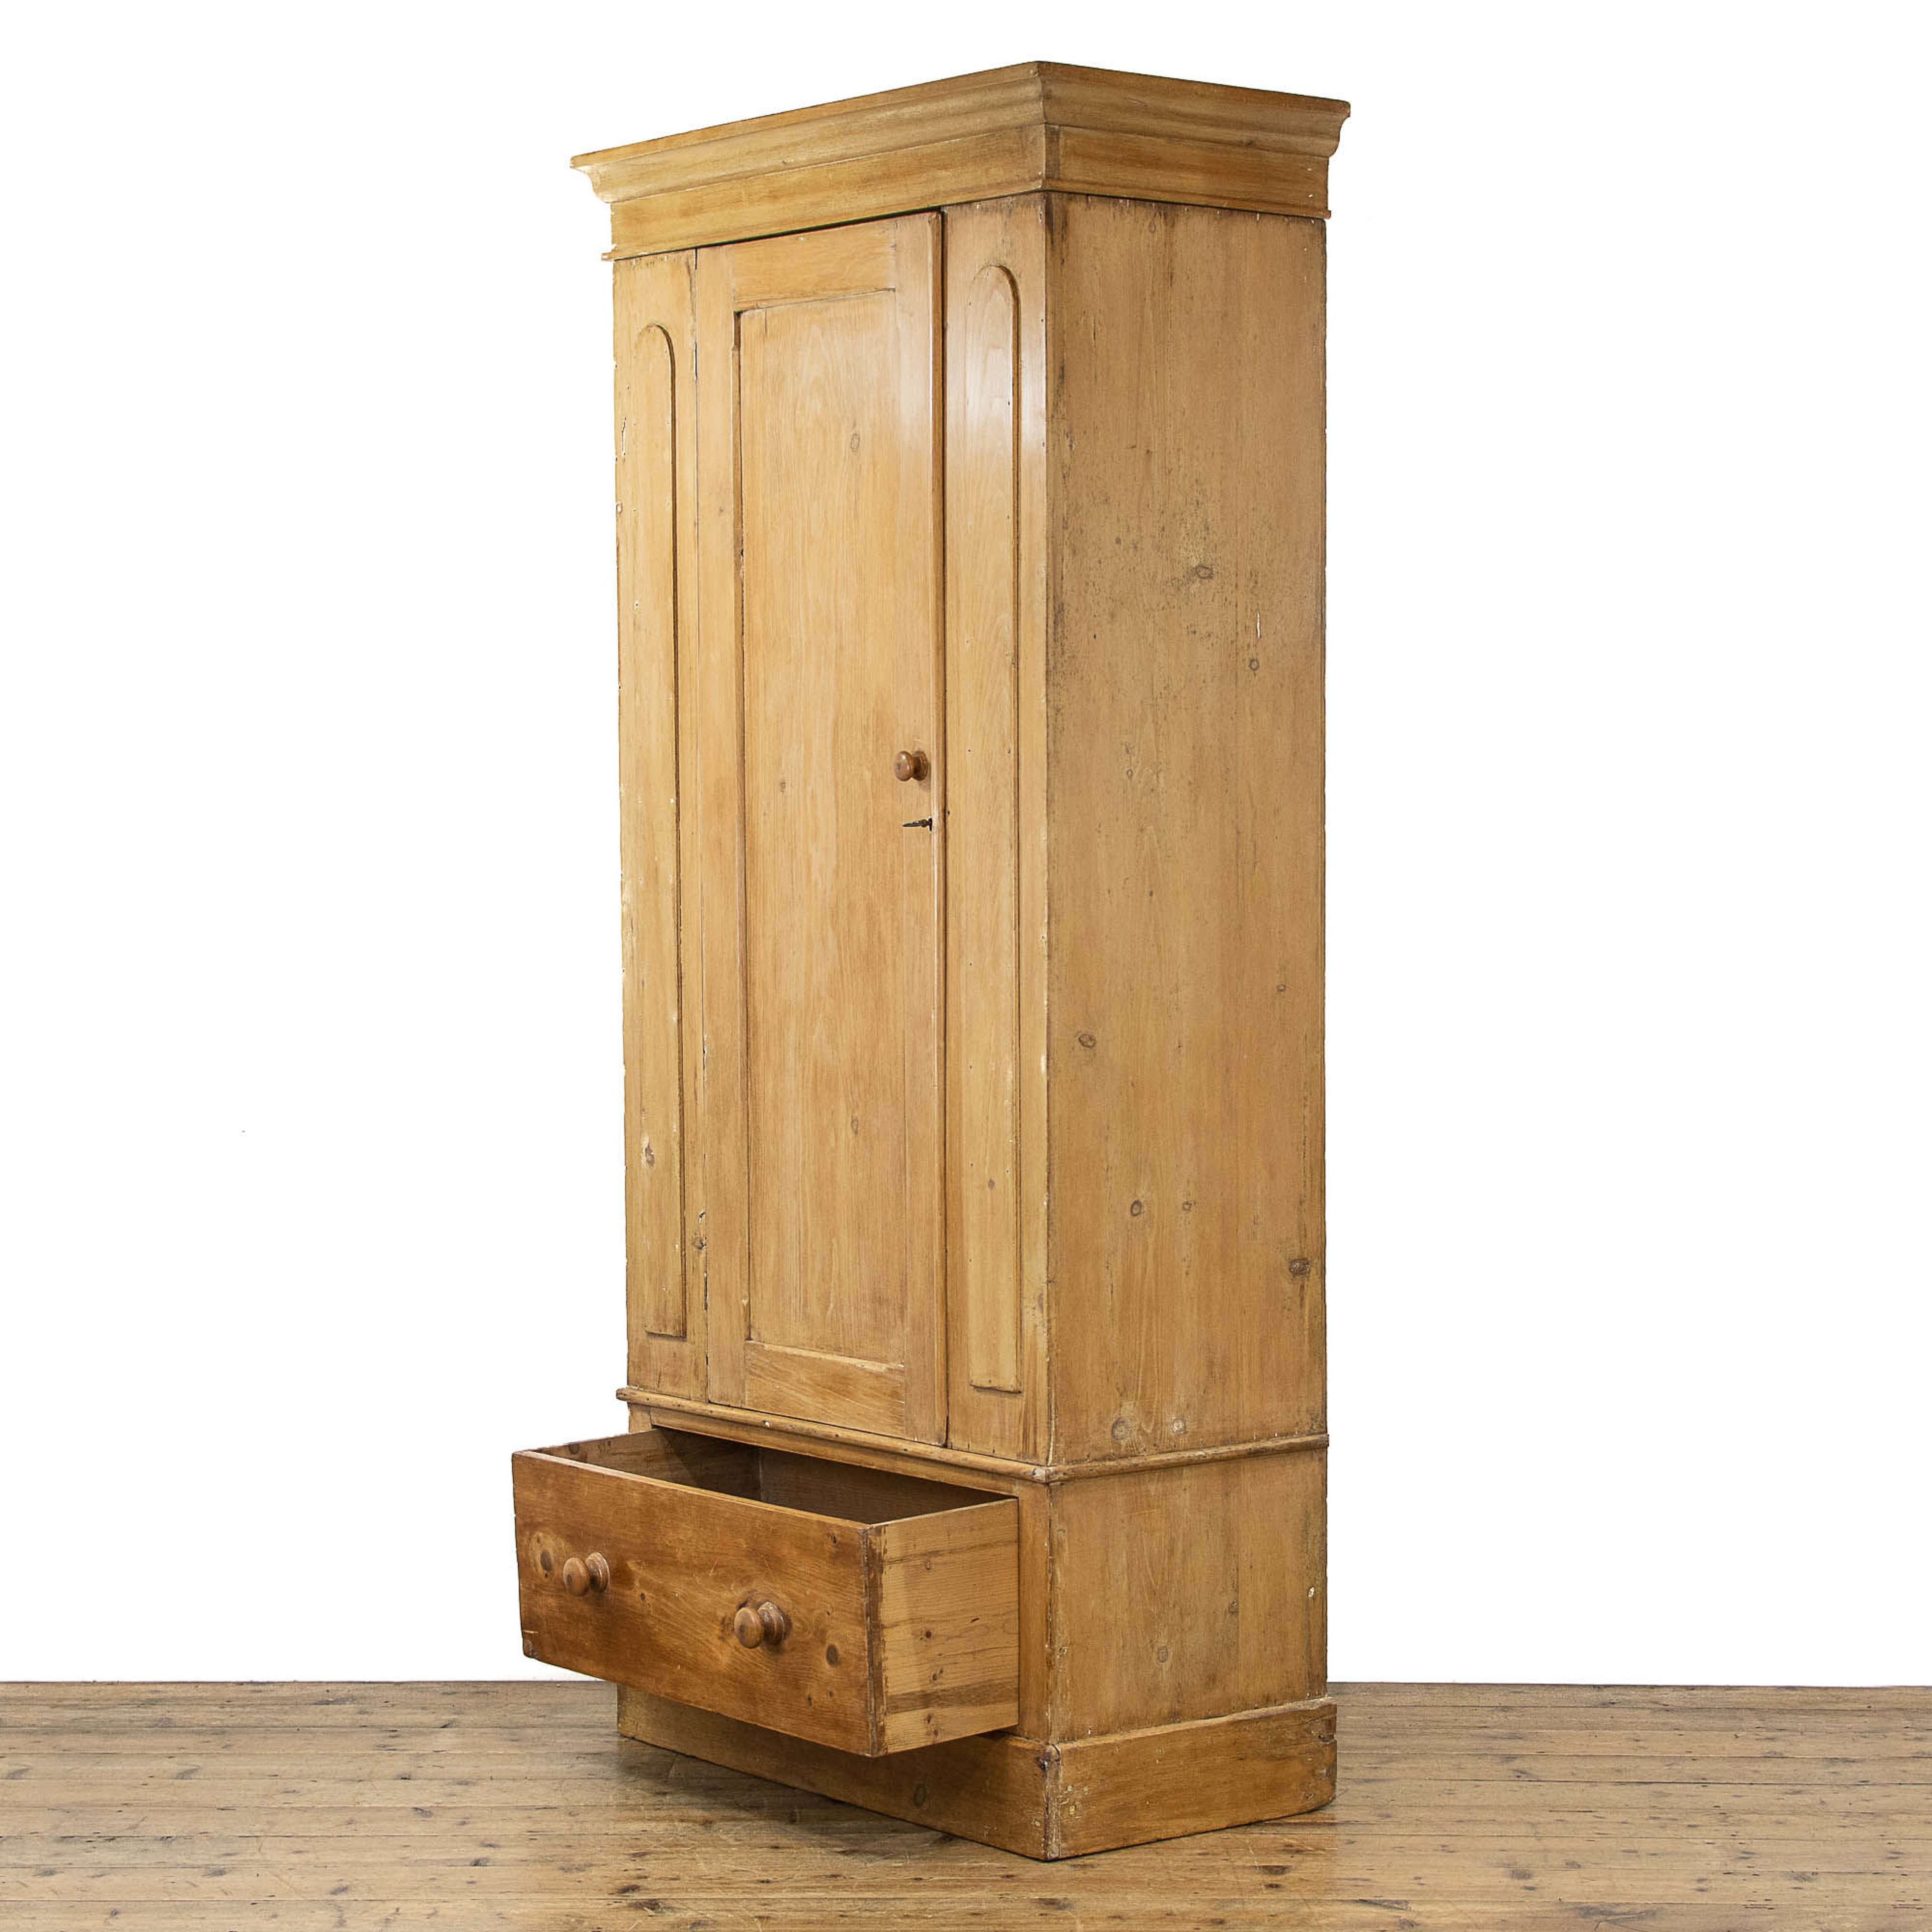 Victorian Stripped Pine Single Wardrobe In Antique Wardrobes & Armoires Inside Antique Single Wardrobes (View 8 of 20)